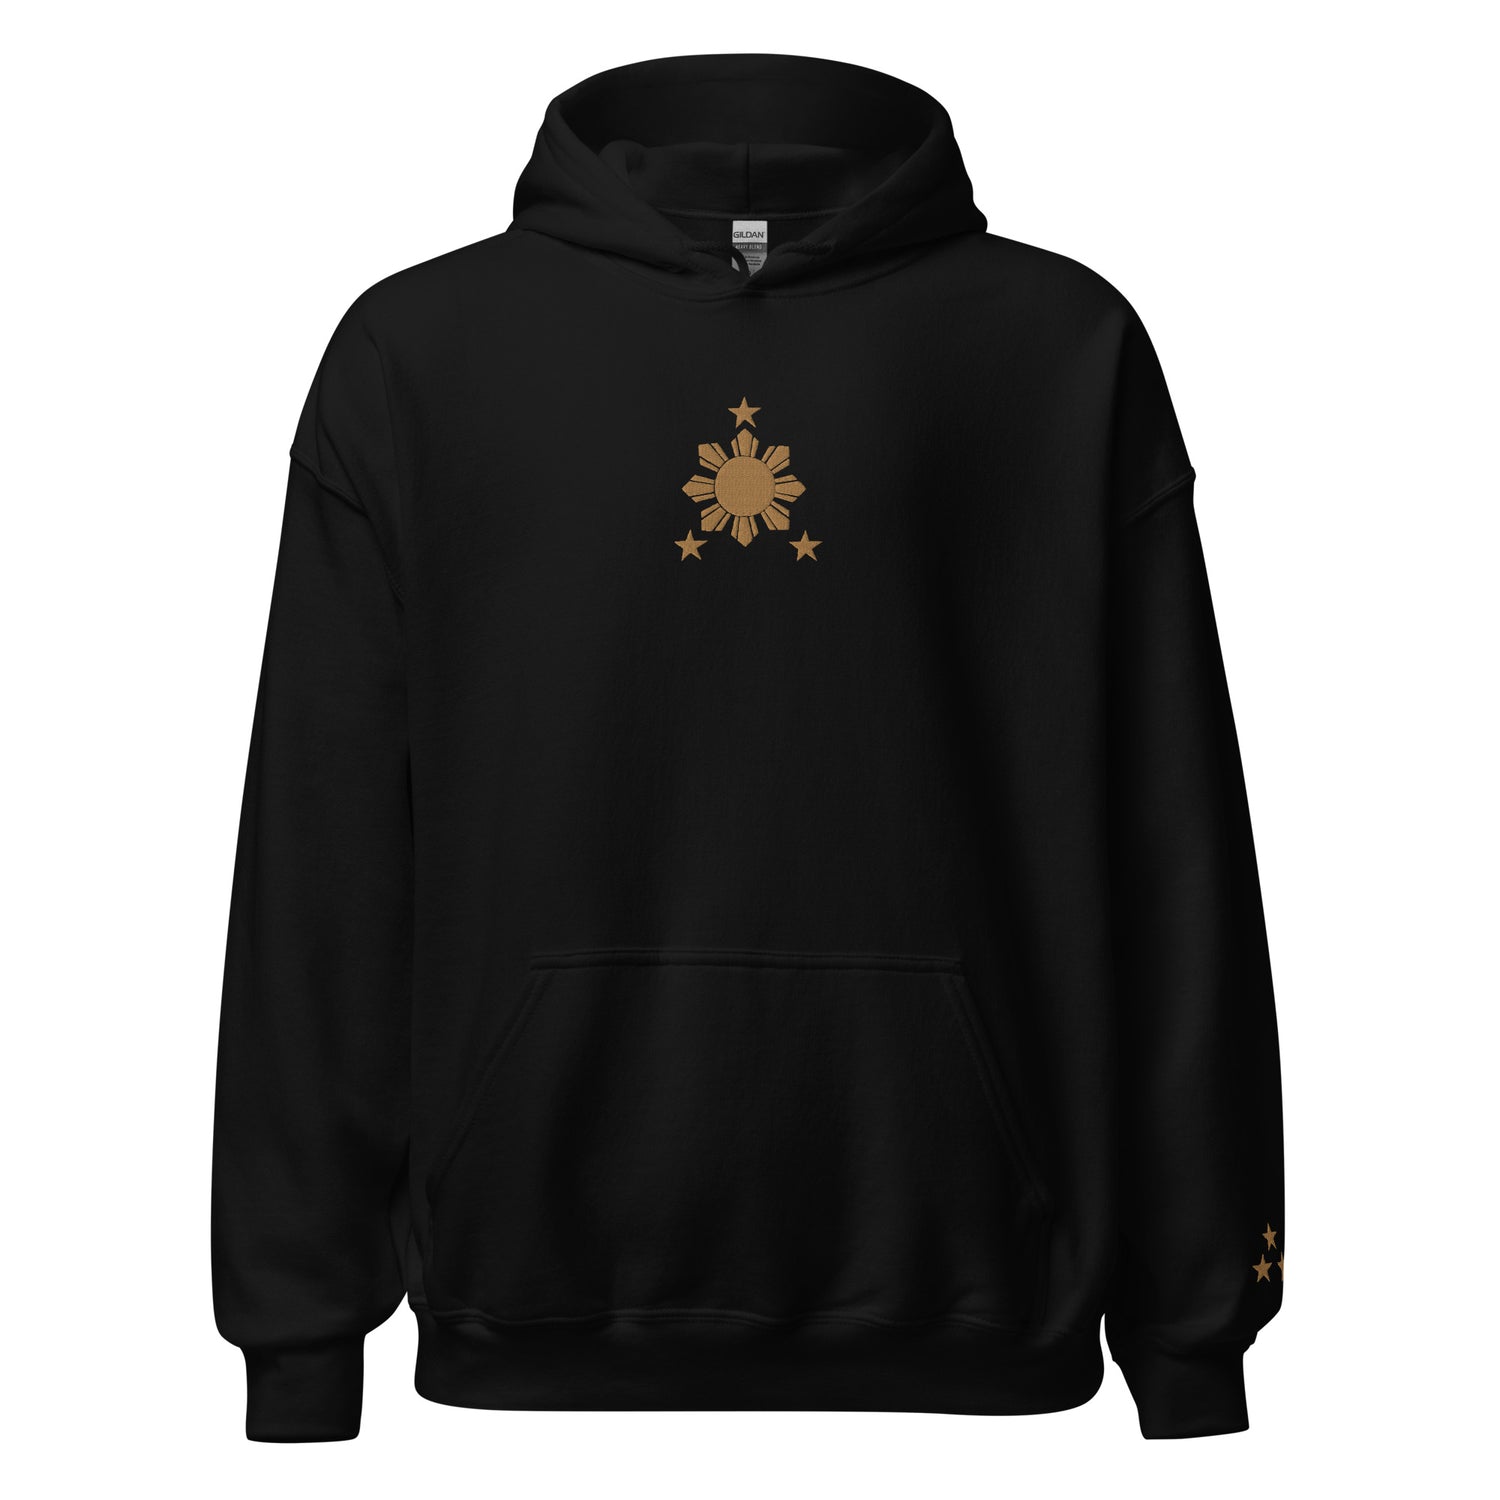 Filipino Hoodie Stars and Sun Embroidered Merch in color variant Black